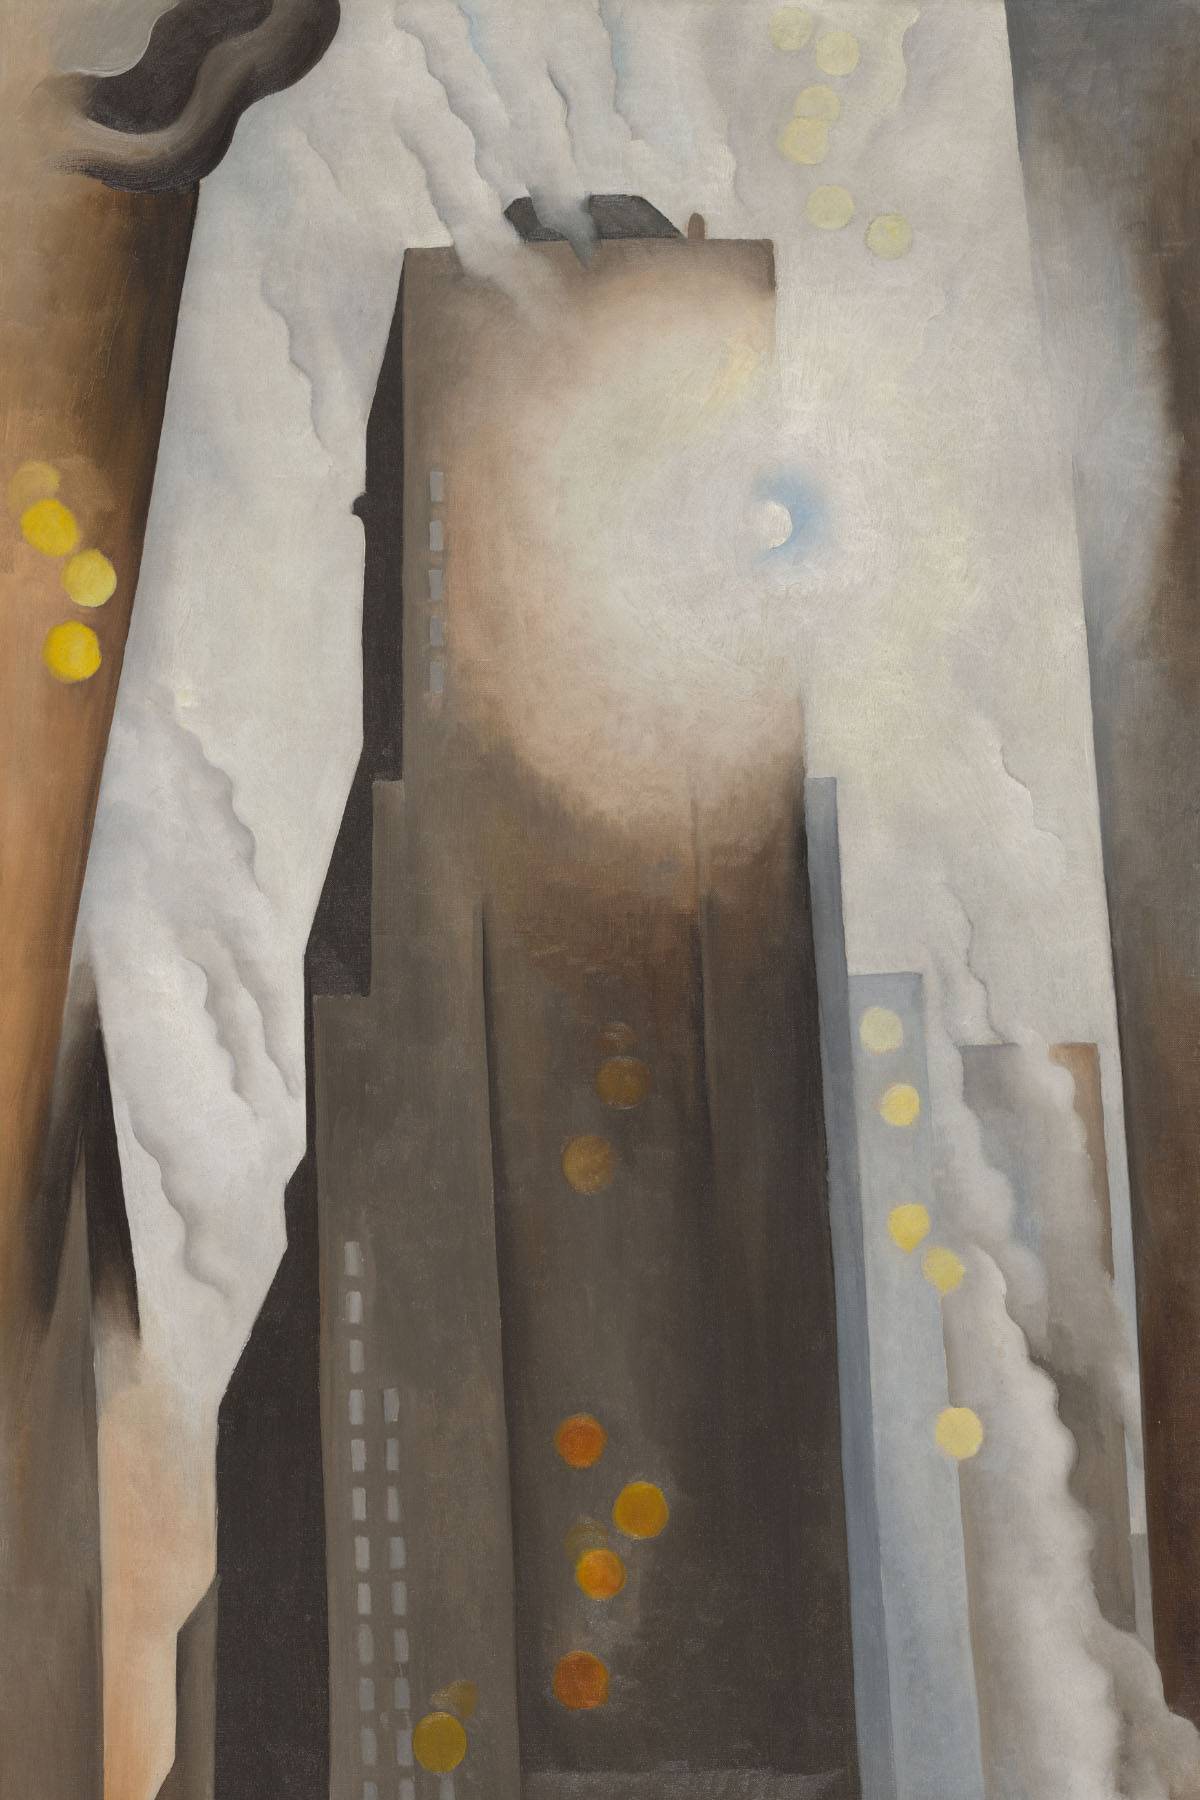 Georgia OKeeffe, The Shelton with Sunspots, N.Y., 1926, The Art Institute of Chicago (© Georgia OKeeffe Museum / Artists Rights Society (ARS), New York)